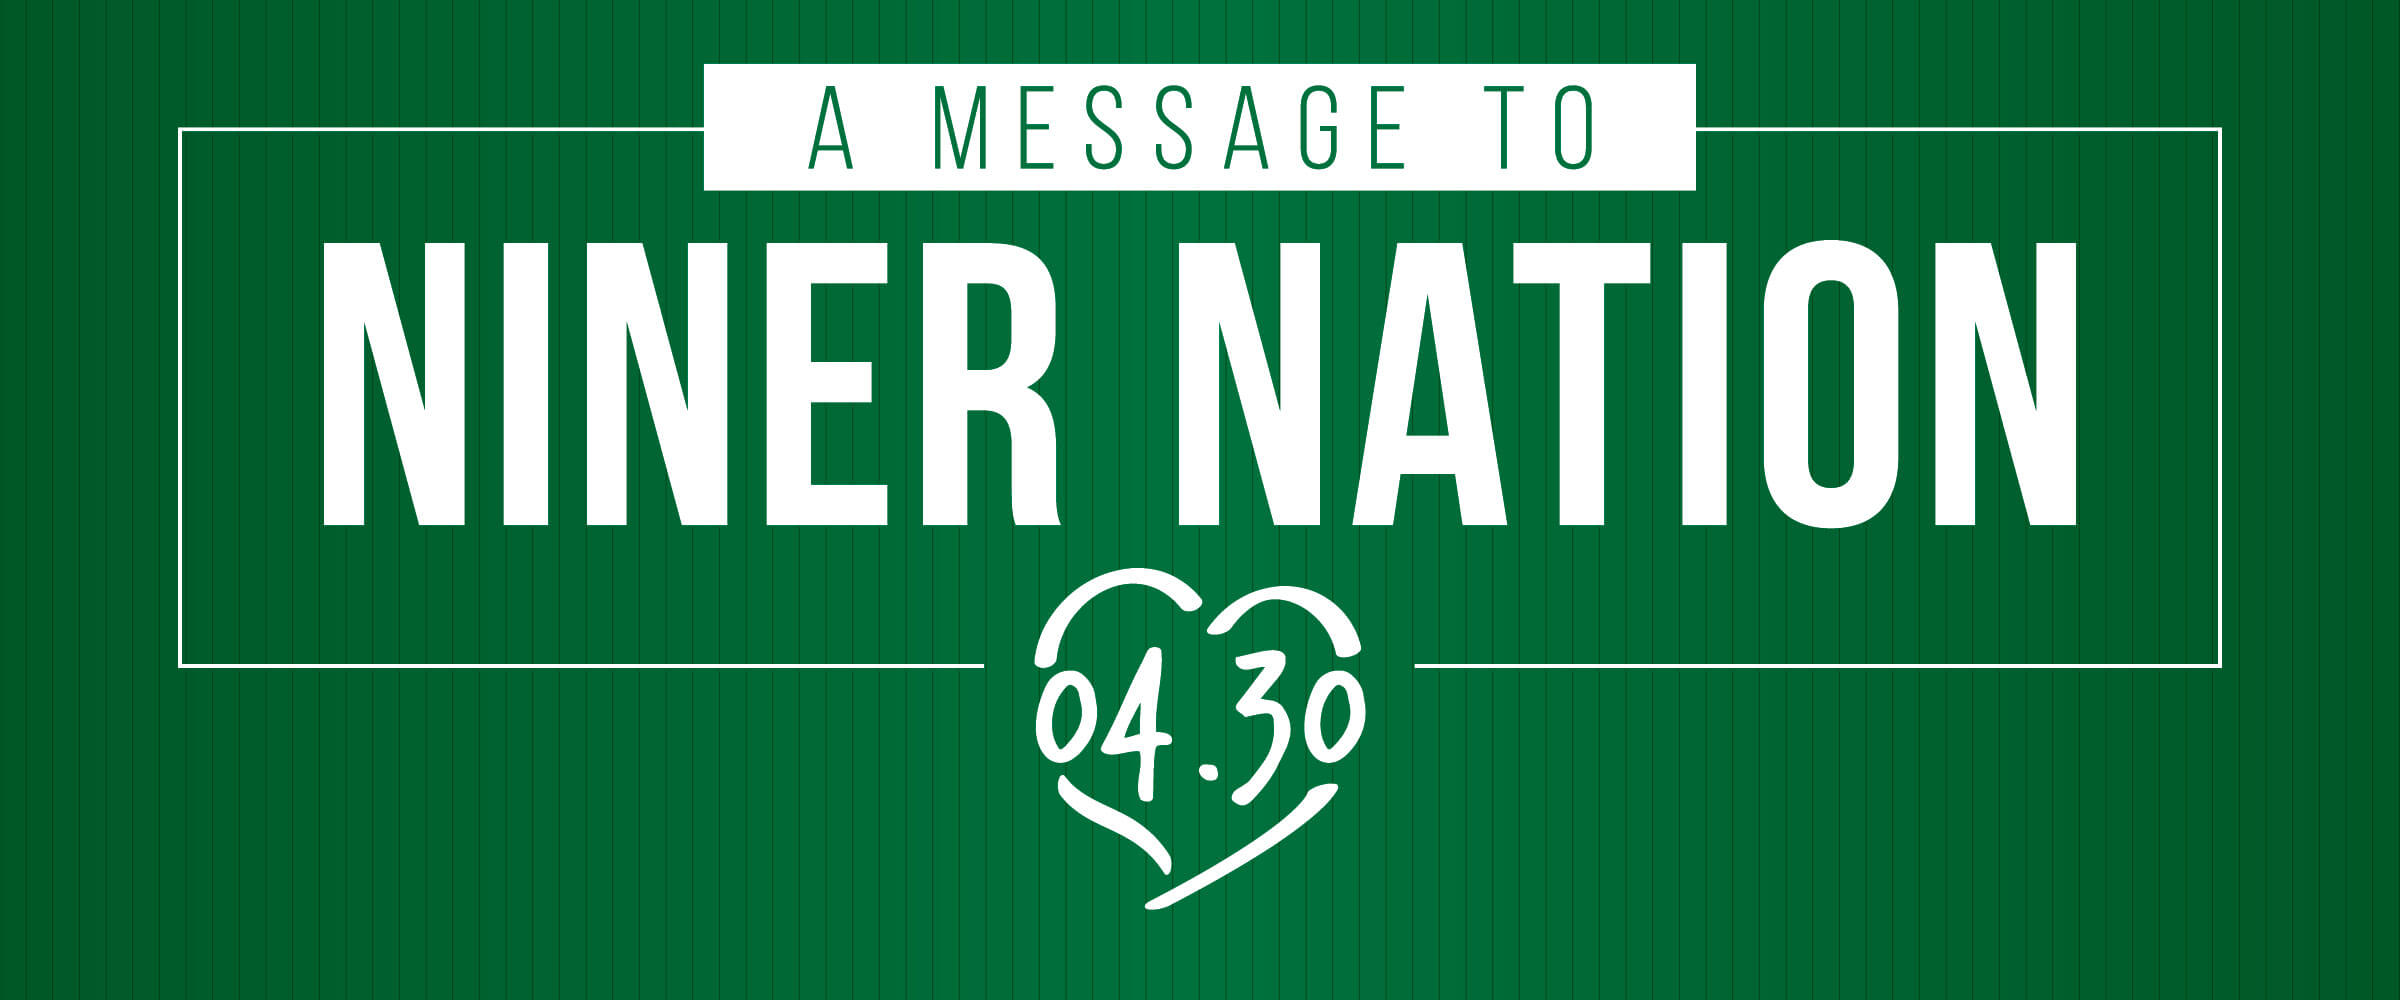 A message to Niner Nation: Today is the UNC Charlotte Day of Remembrance